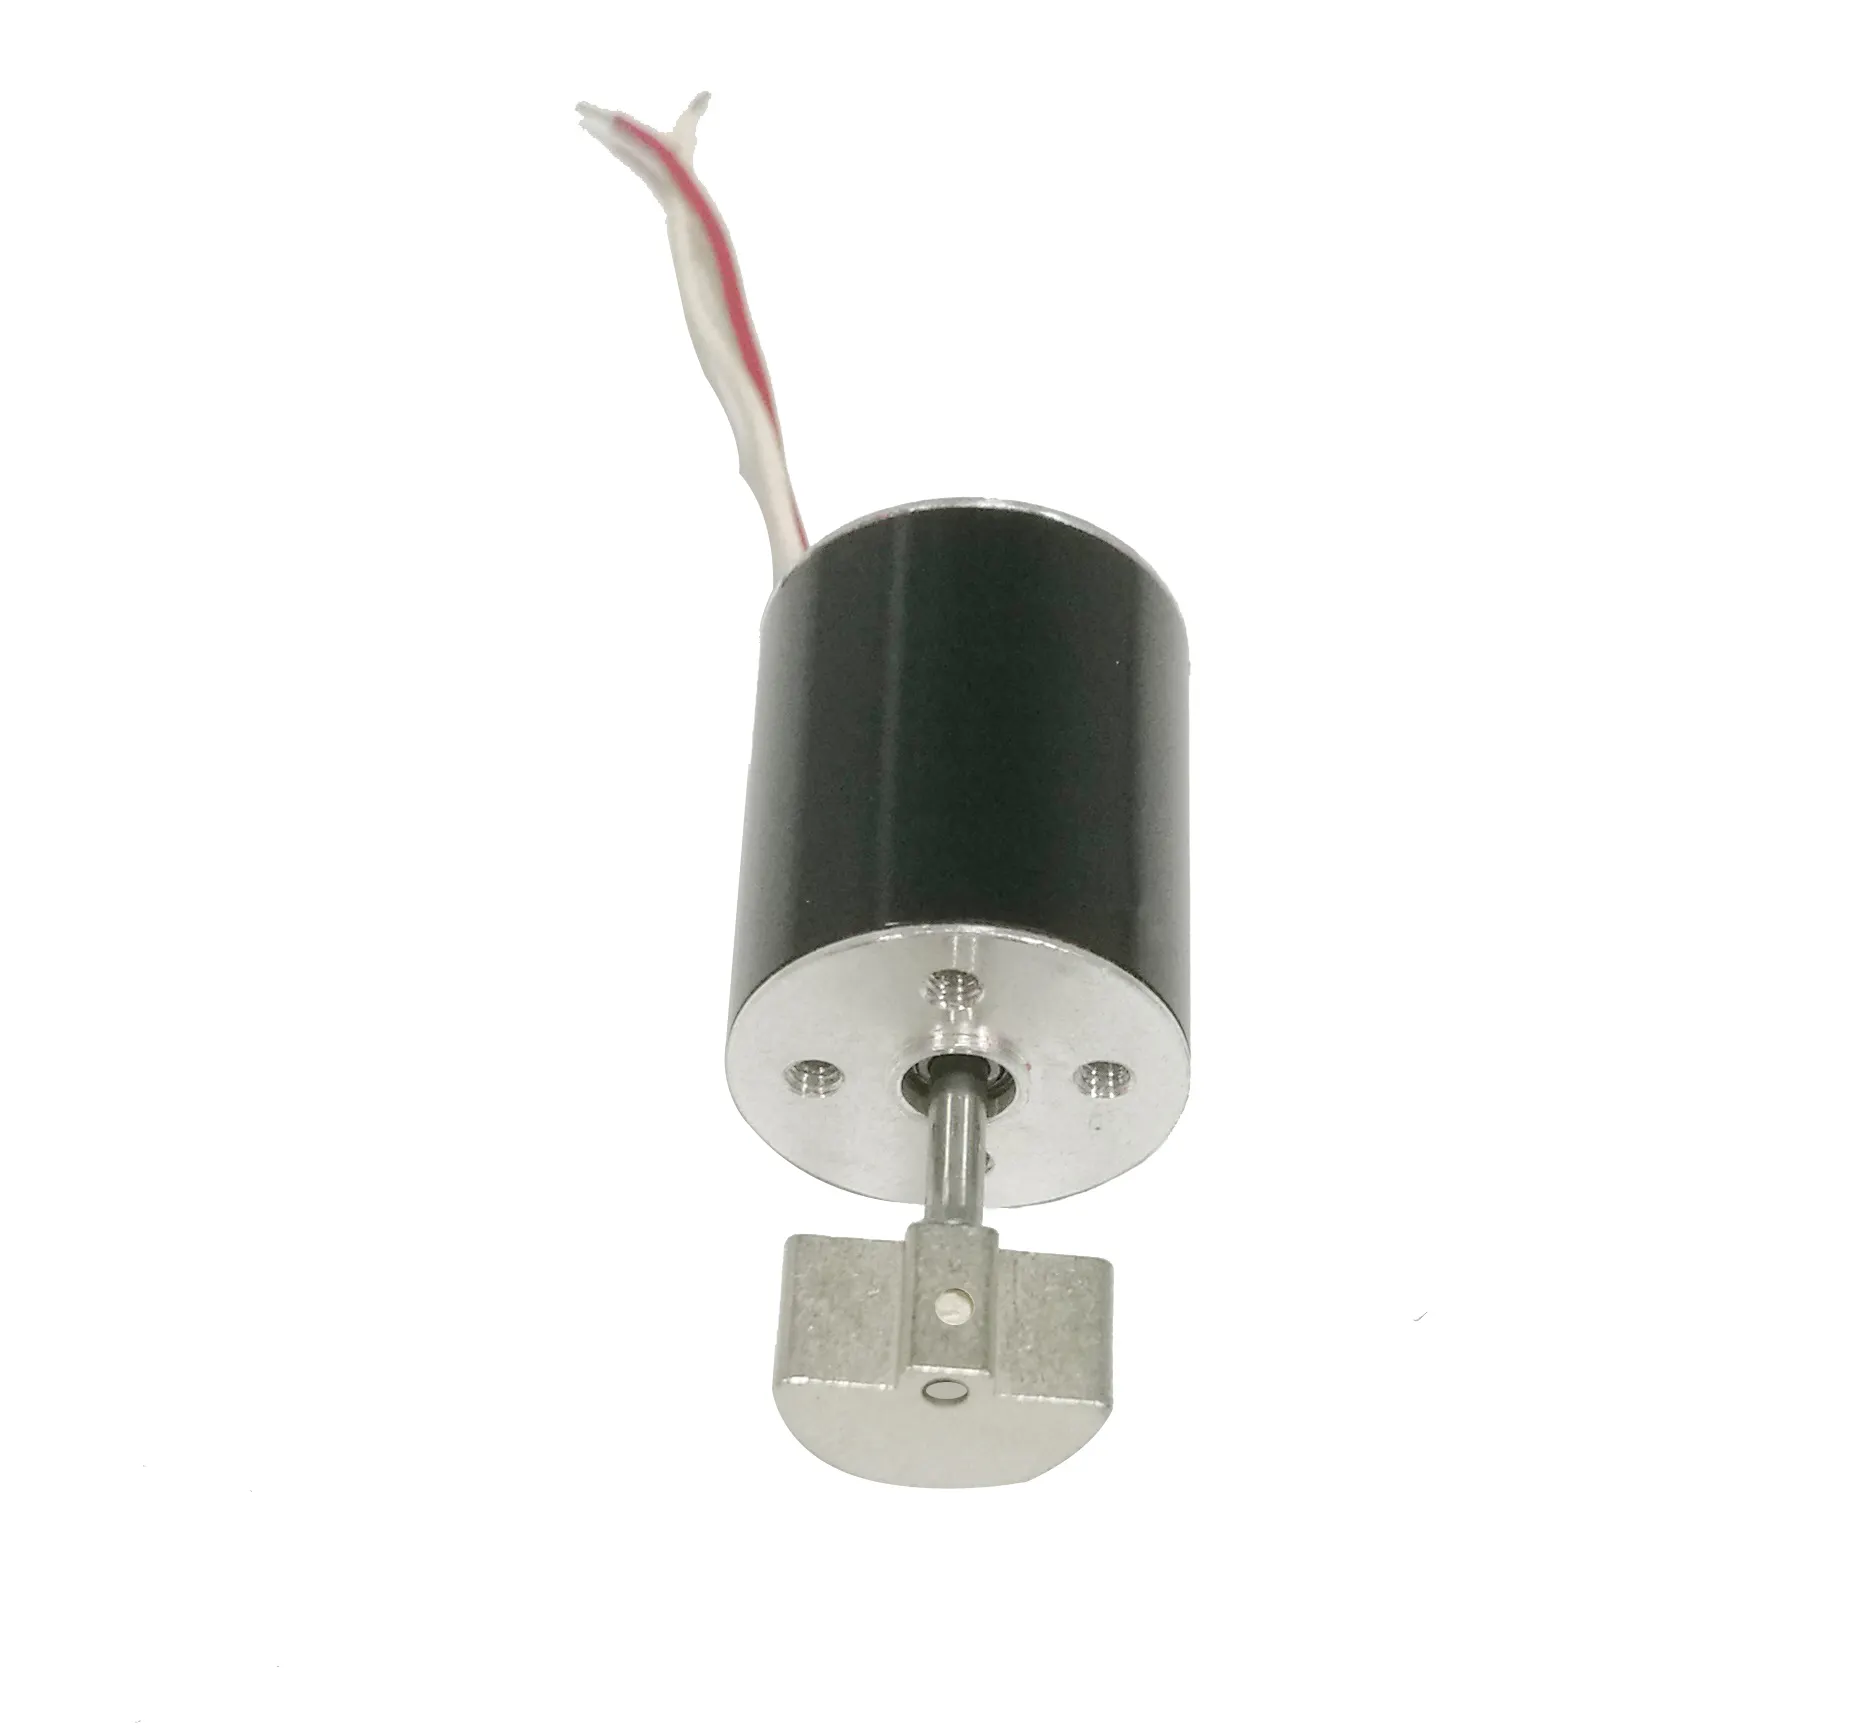 Low noise 1620 brushless vibration motor with eccentric gear